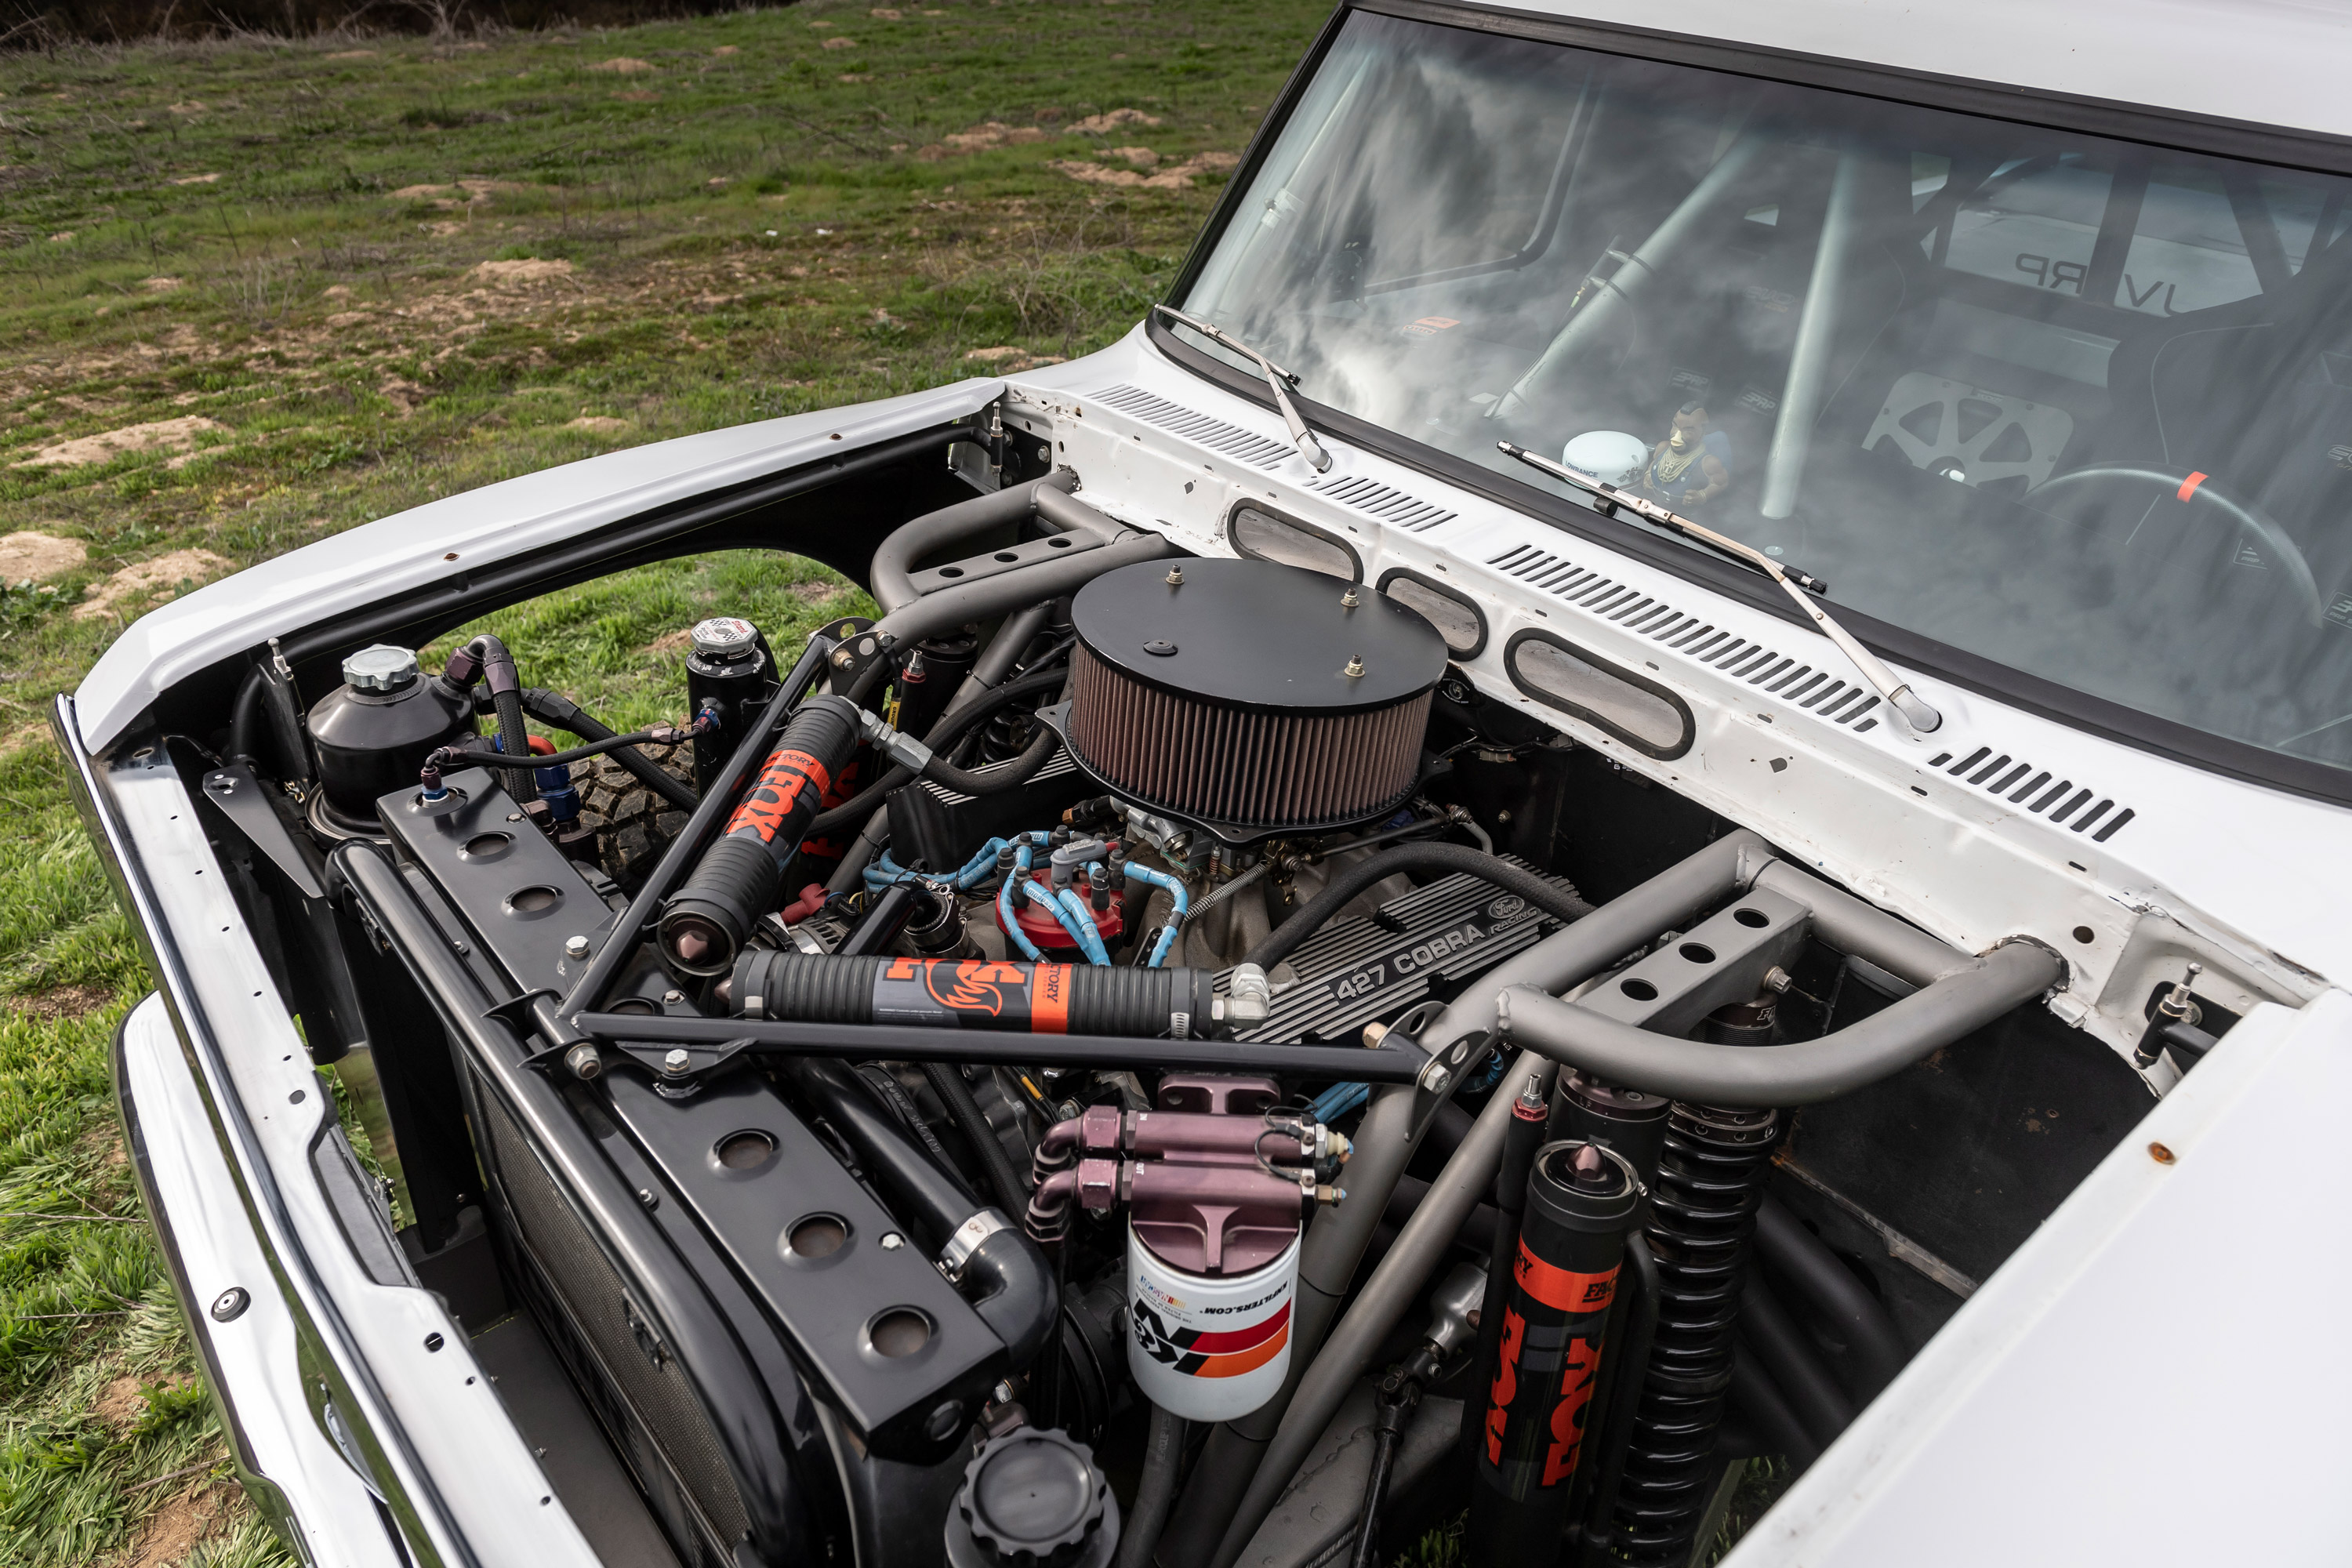 Static image of a pre-runner 1974 Ford F100 truck engine